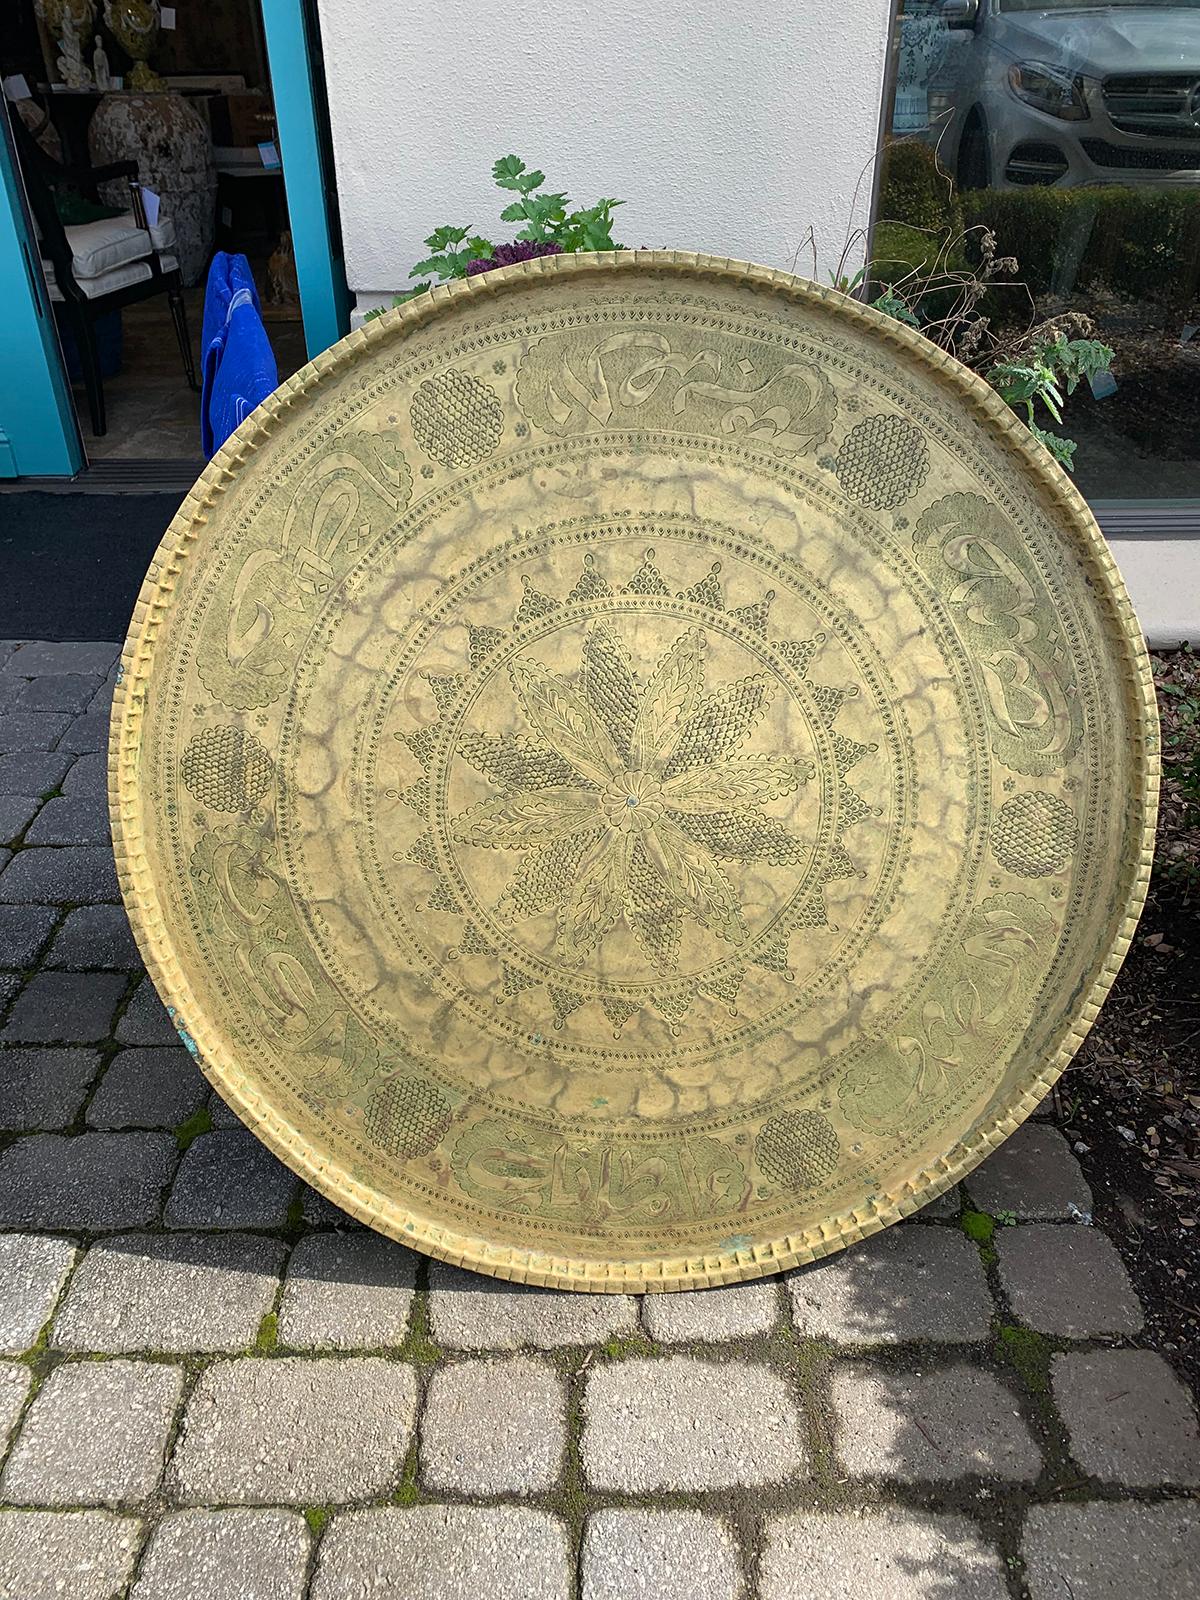 Large 19th-20th century middle eastern round brass tray.